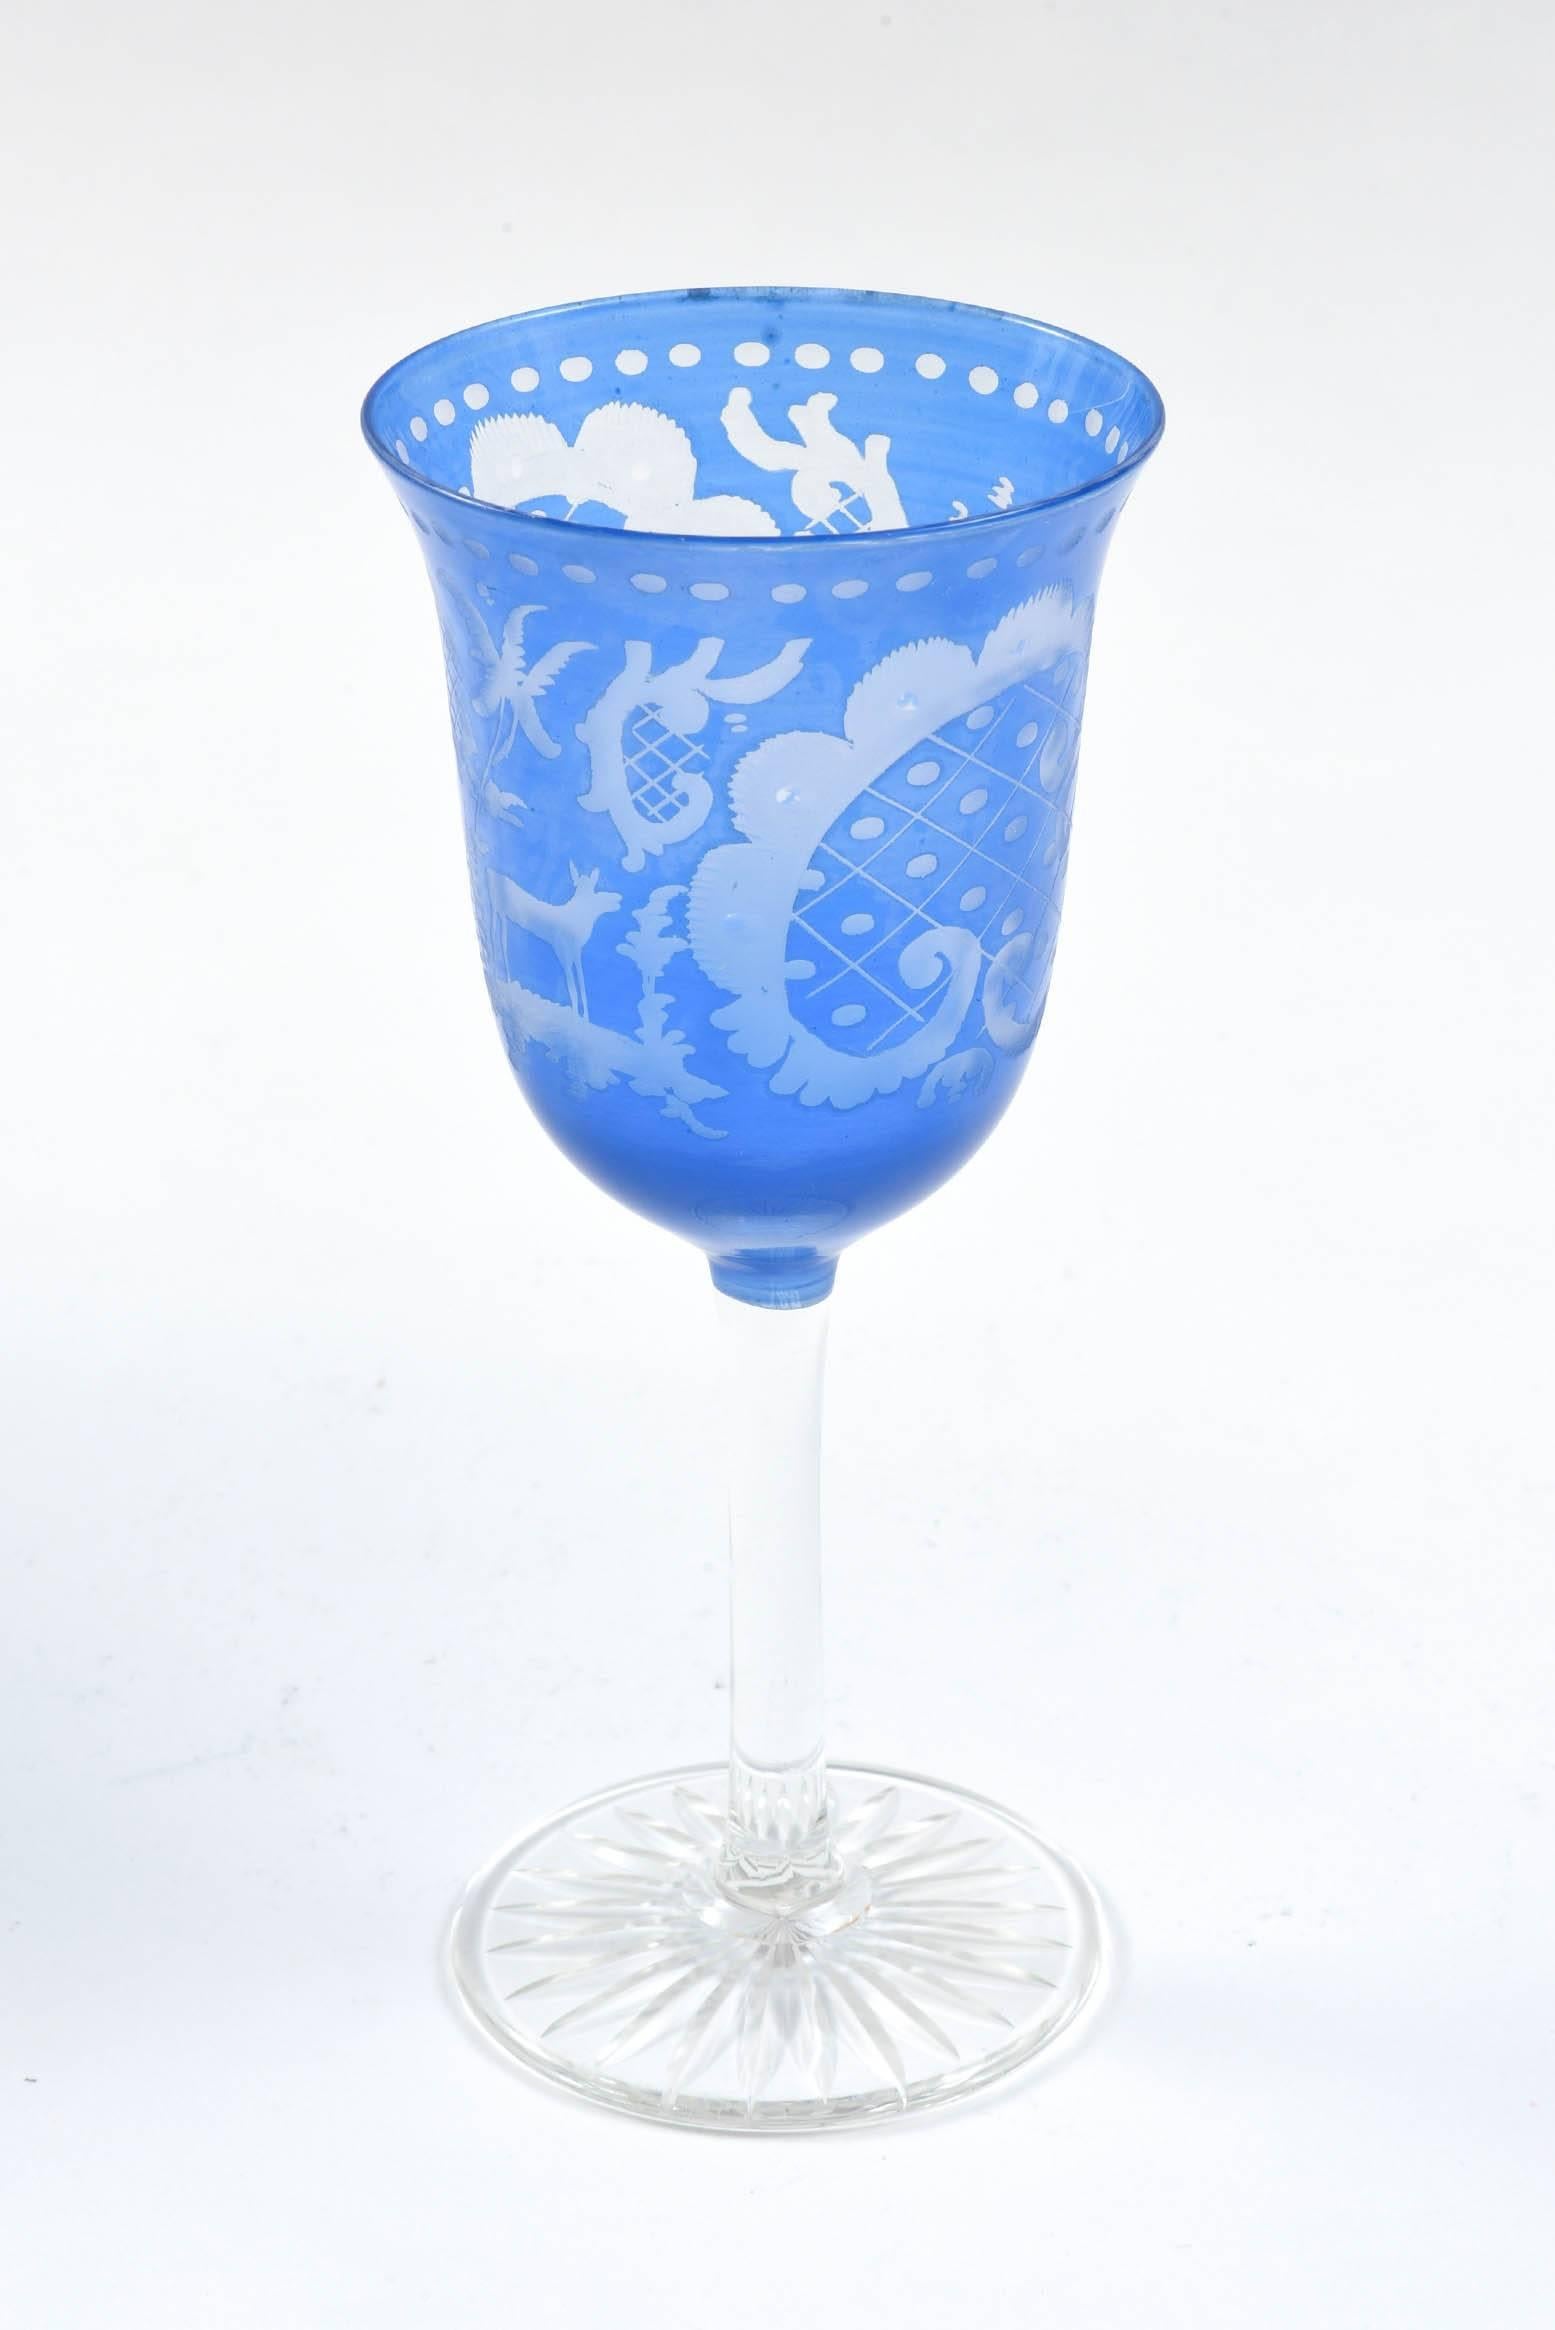 Hand-Crafted Blue Crystal Stemware Service for 12, Great Color & Goblet Size. Antique & Rare